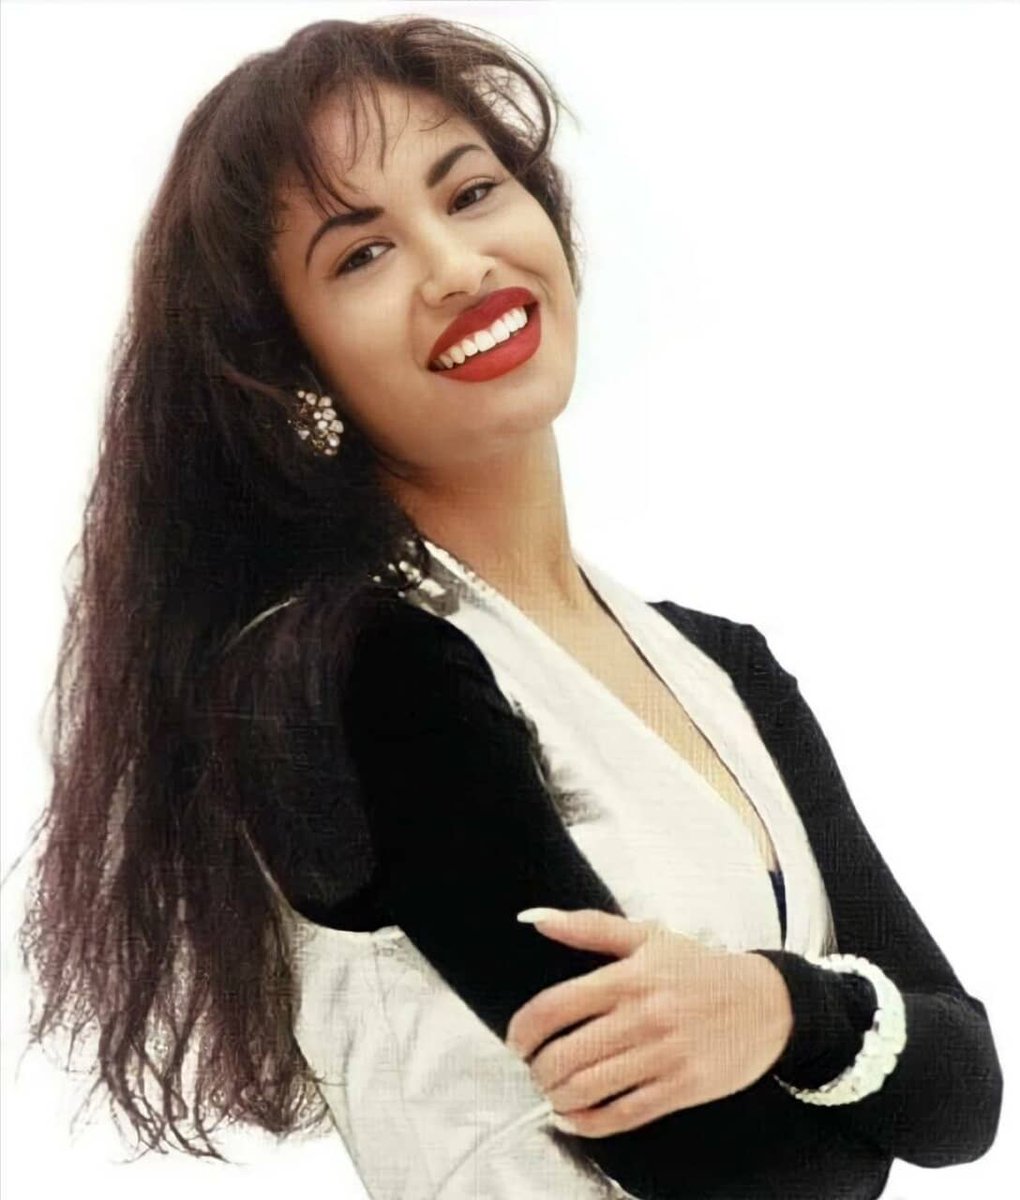 March 30, 1995, we've lost a legendary singer and fashion designer named Selena Quintanilla-Perez who was a sweet, lovable, and a very beautiful woman. She was an icon that deserved to live a better life, but she was taken from us over an act of violent betrayal. We love you. https://t.co/rbypnBmcK5